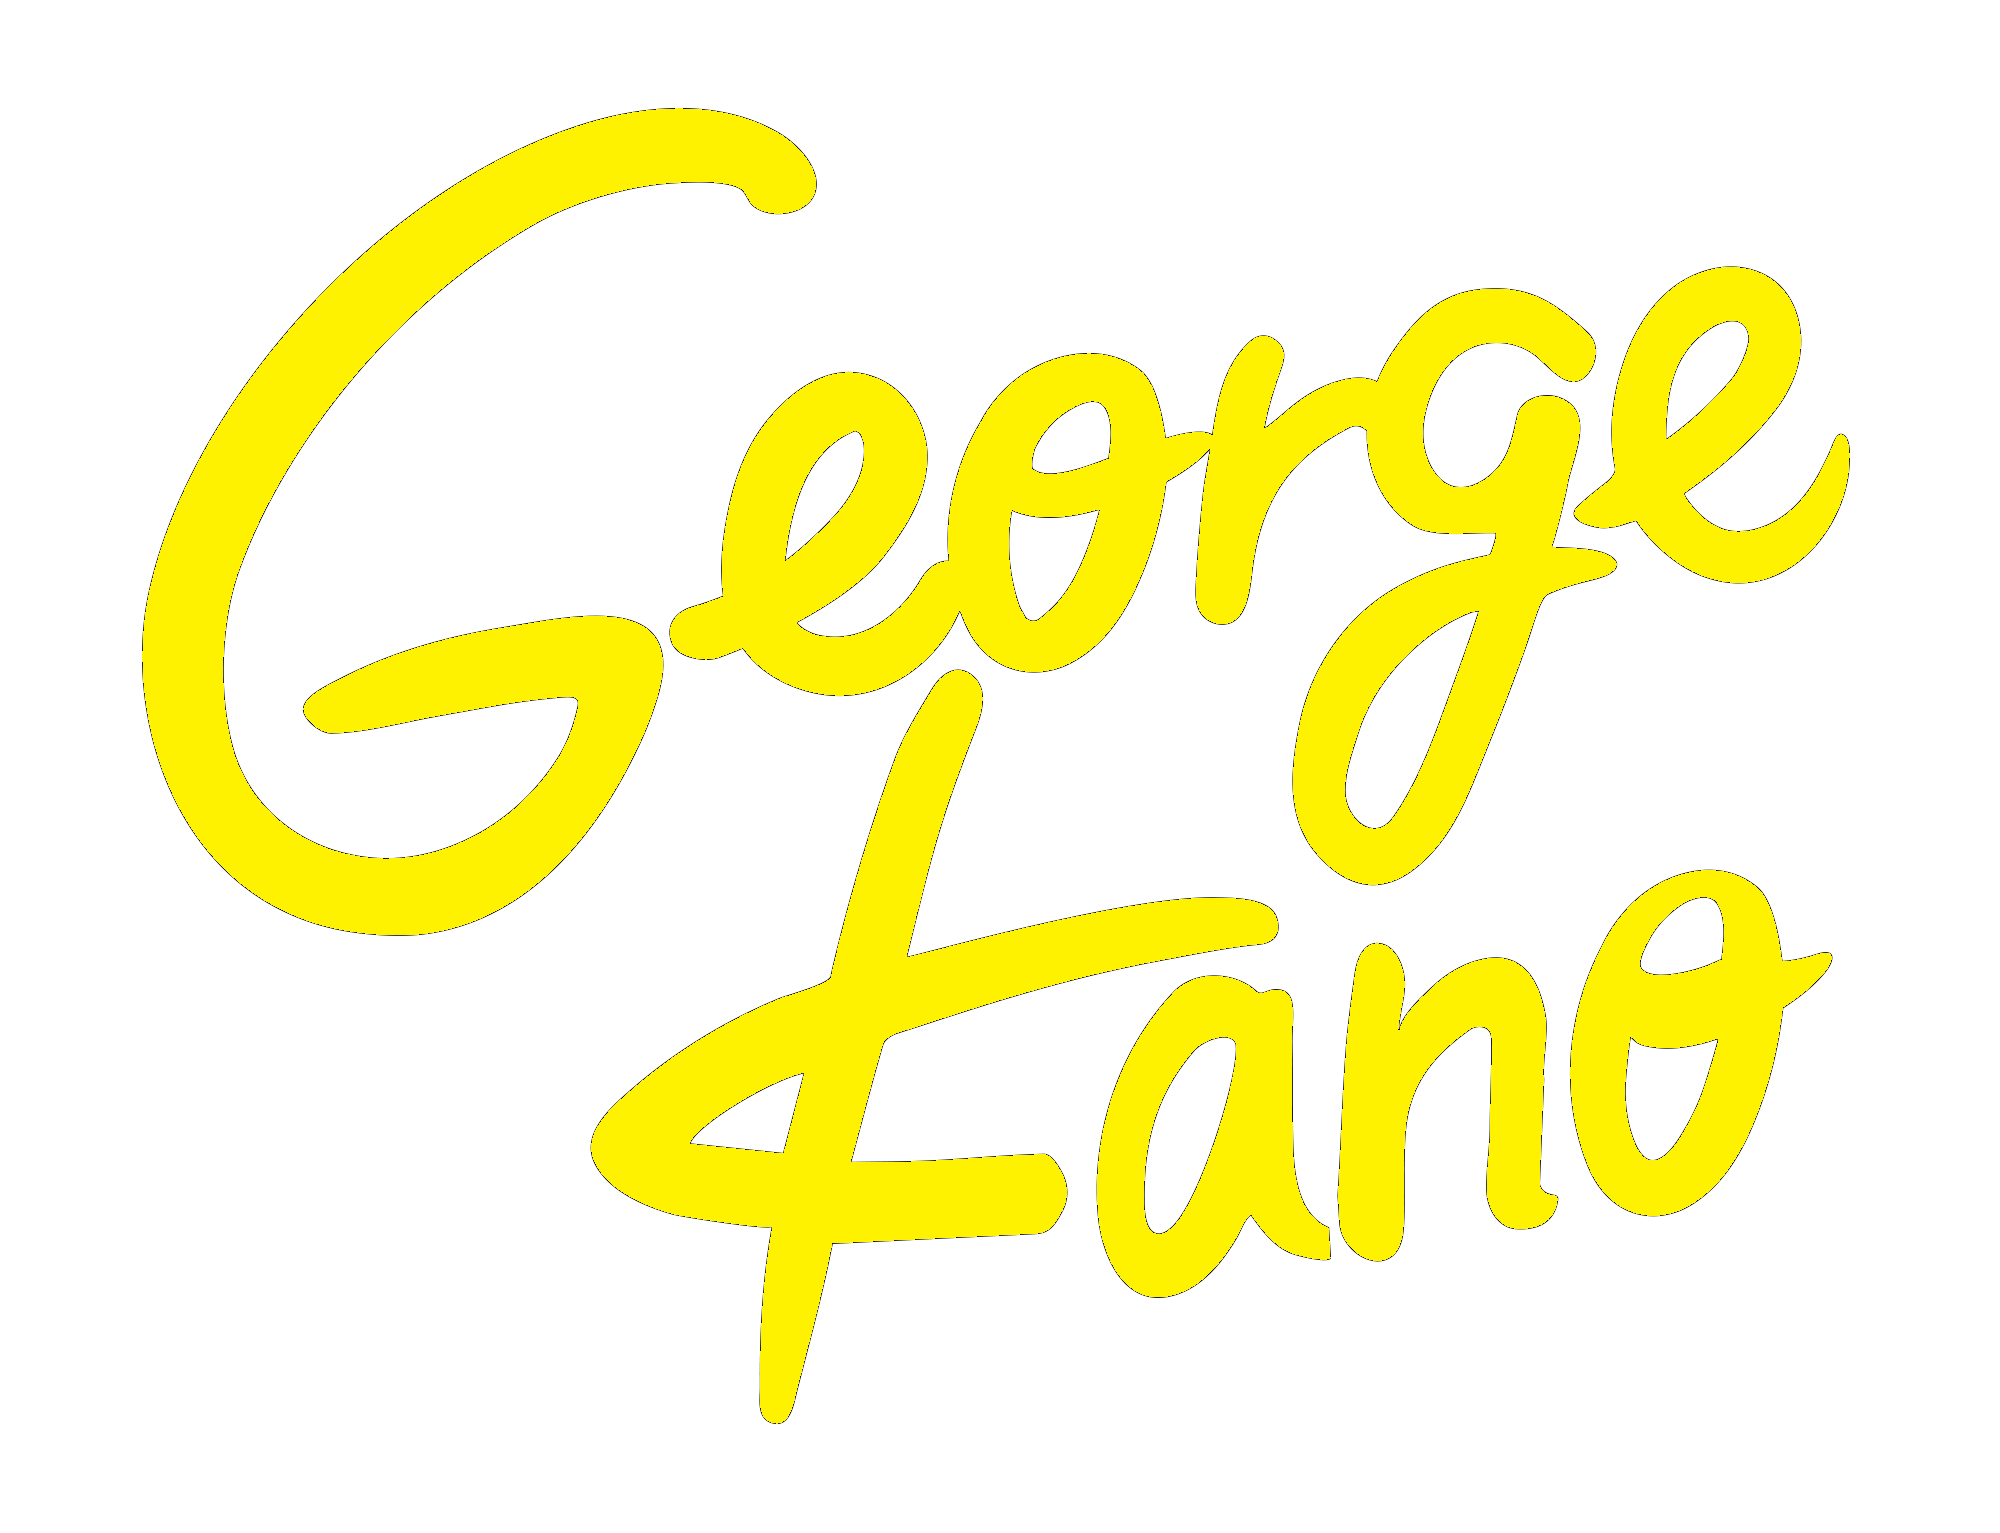 George Kano official online shop